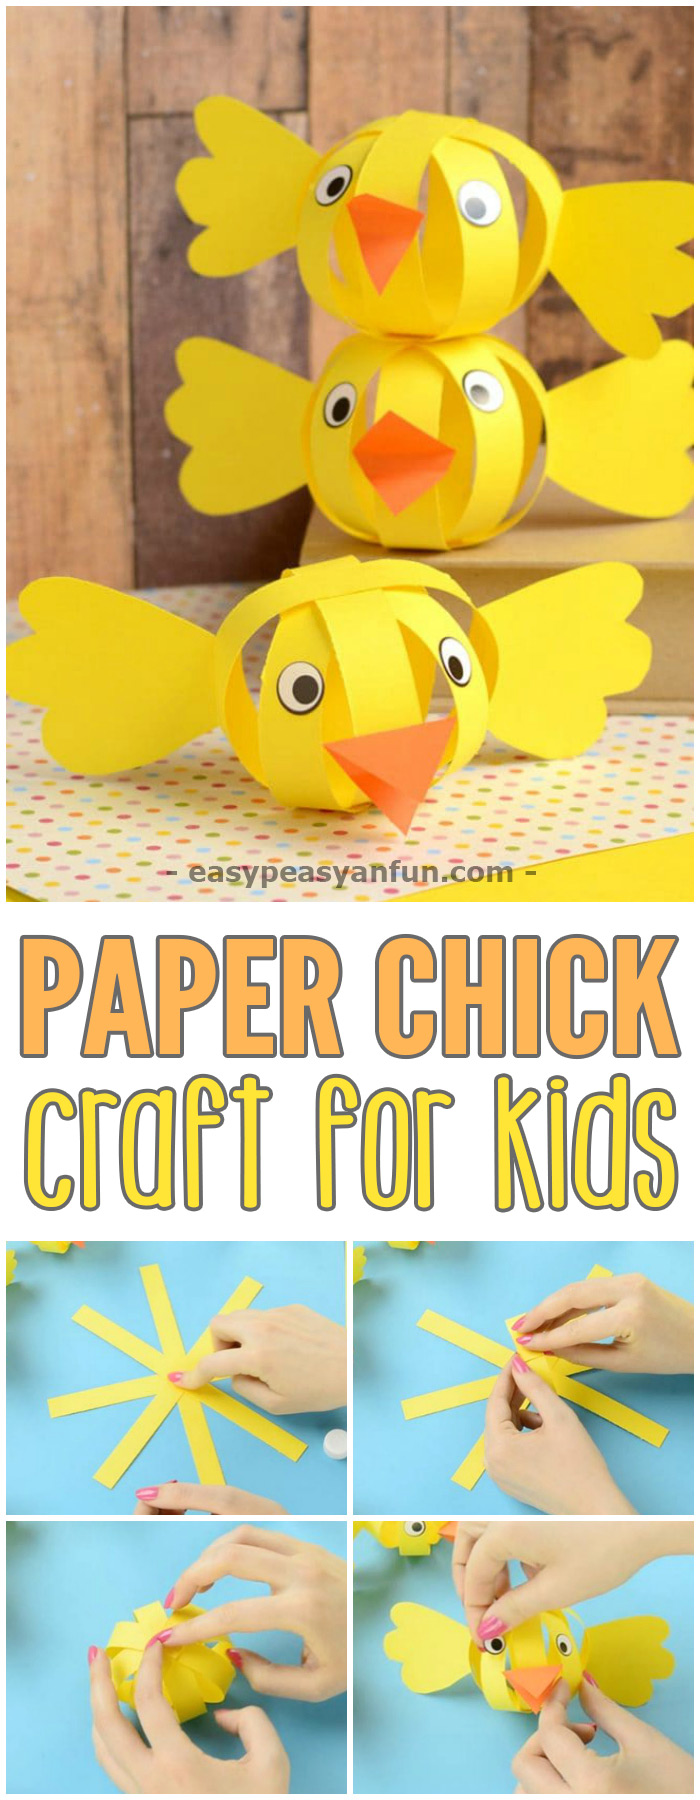 Simple Simple Paper Chick Craft #craftsforkids #Eastercrafts #papercrafts